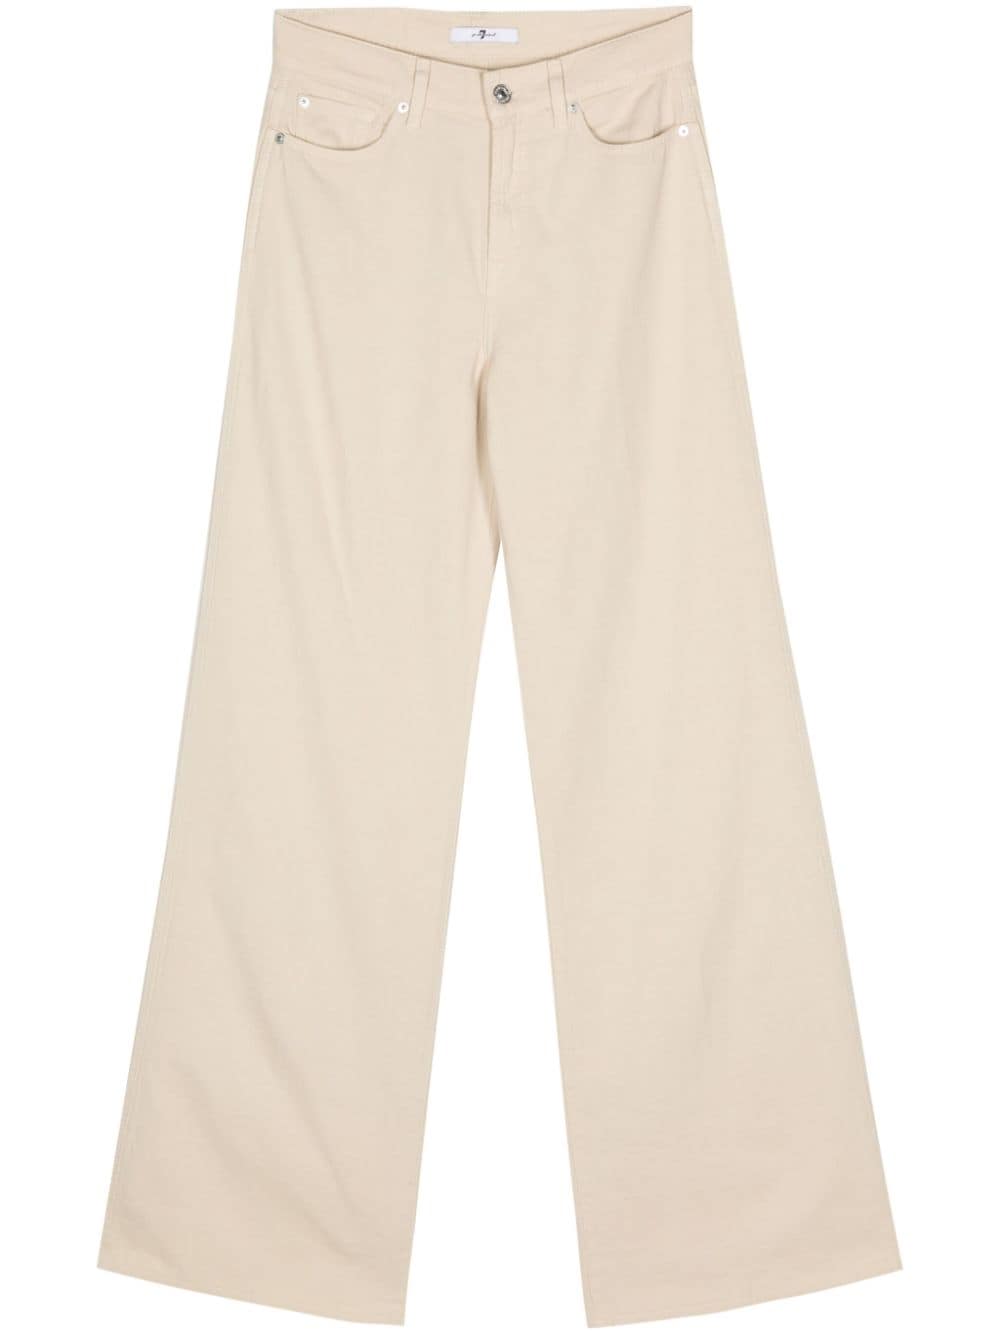 7 For All Mankind 7 FOR ALL MANKIND- Lotta Wide-leg Linen Jeans